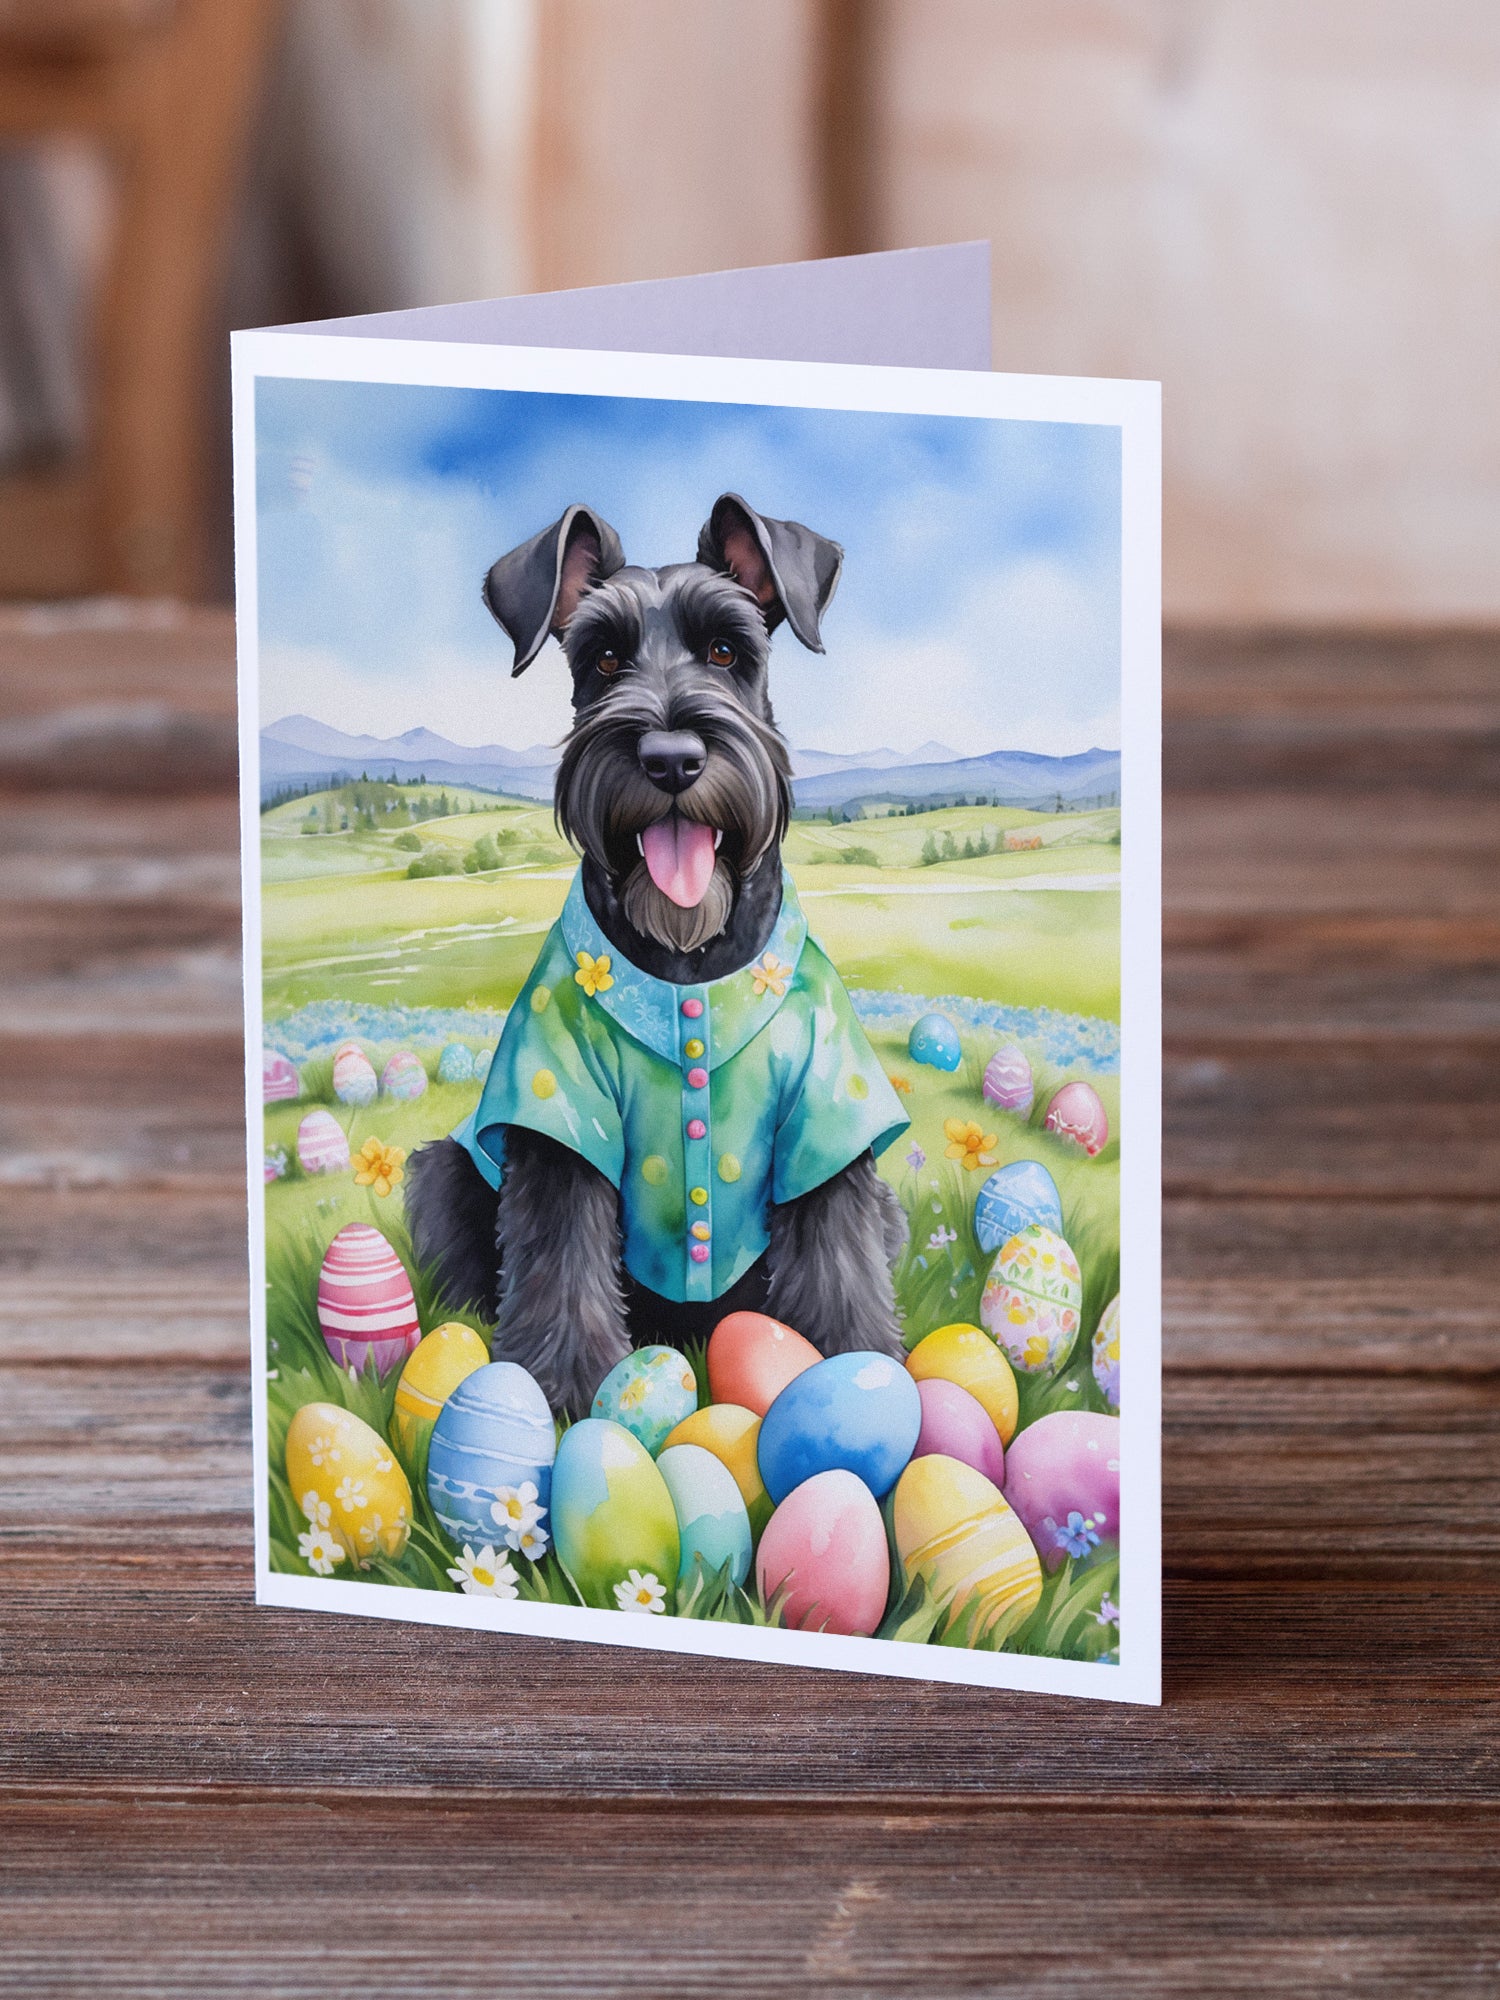 Giant Schnauzer Easter Egg Hunt Greeting Cards Pack of 8